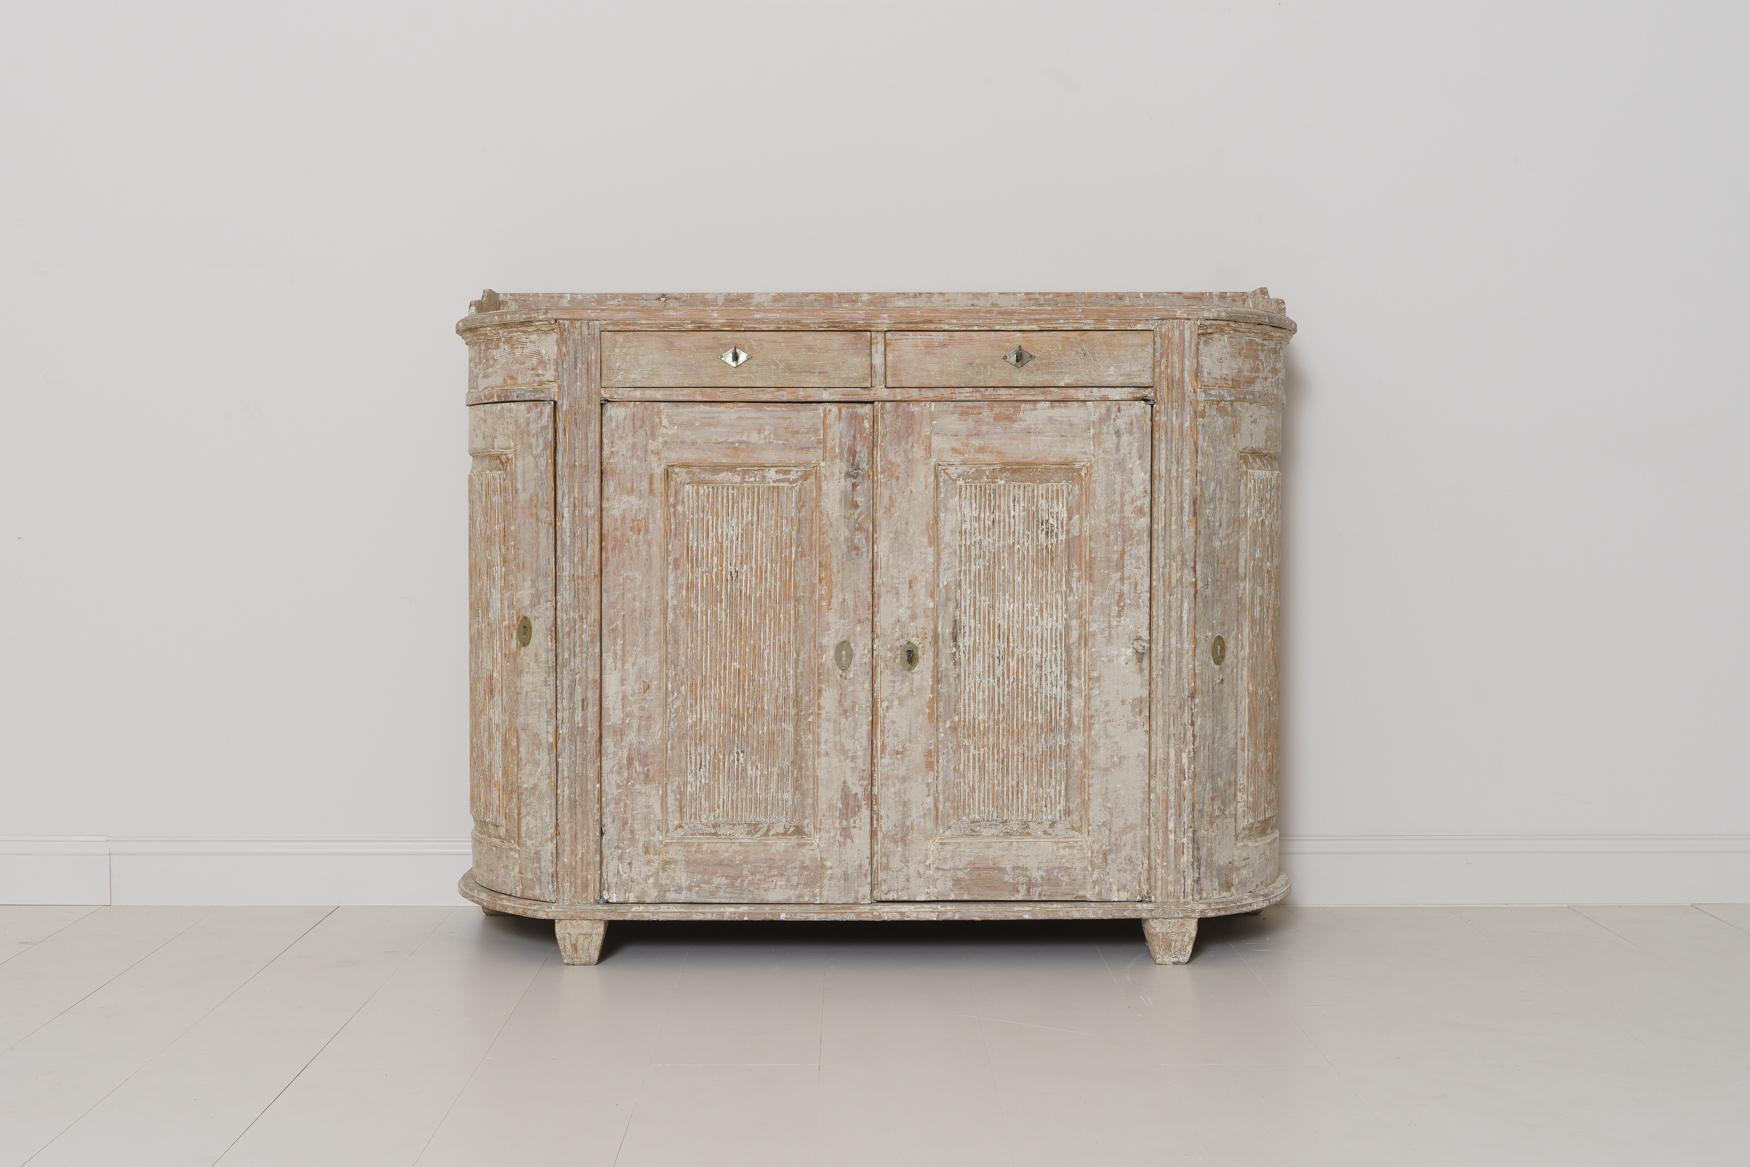 A Swedish demilune sideboard or server in original paint from the Gustavian period.  The patina is a beautiful chalky old ivory-white with natural wood showing through in areas. The buffet has two drawers and three reeded, raised panel doors. The